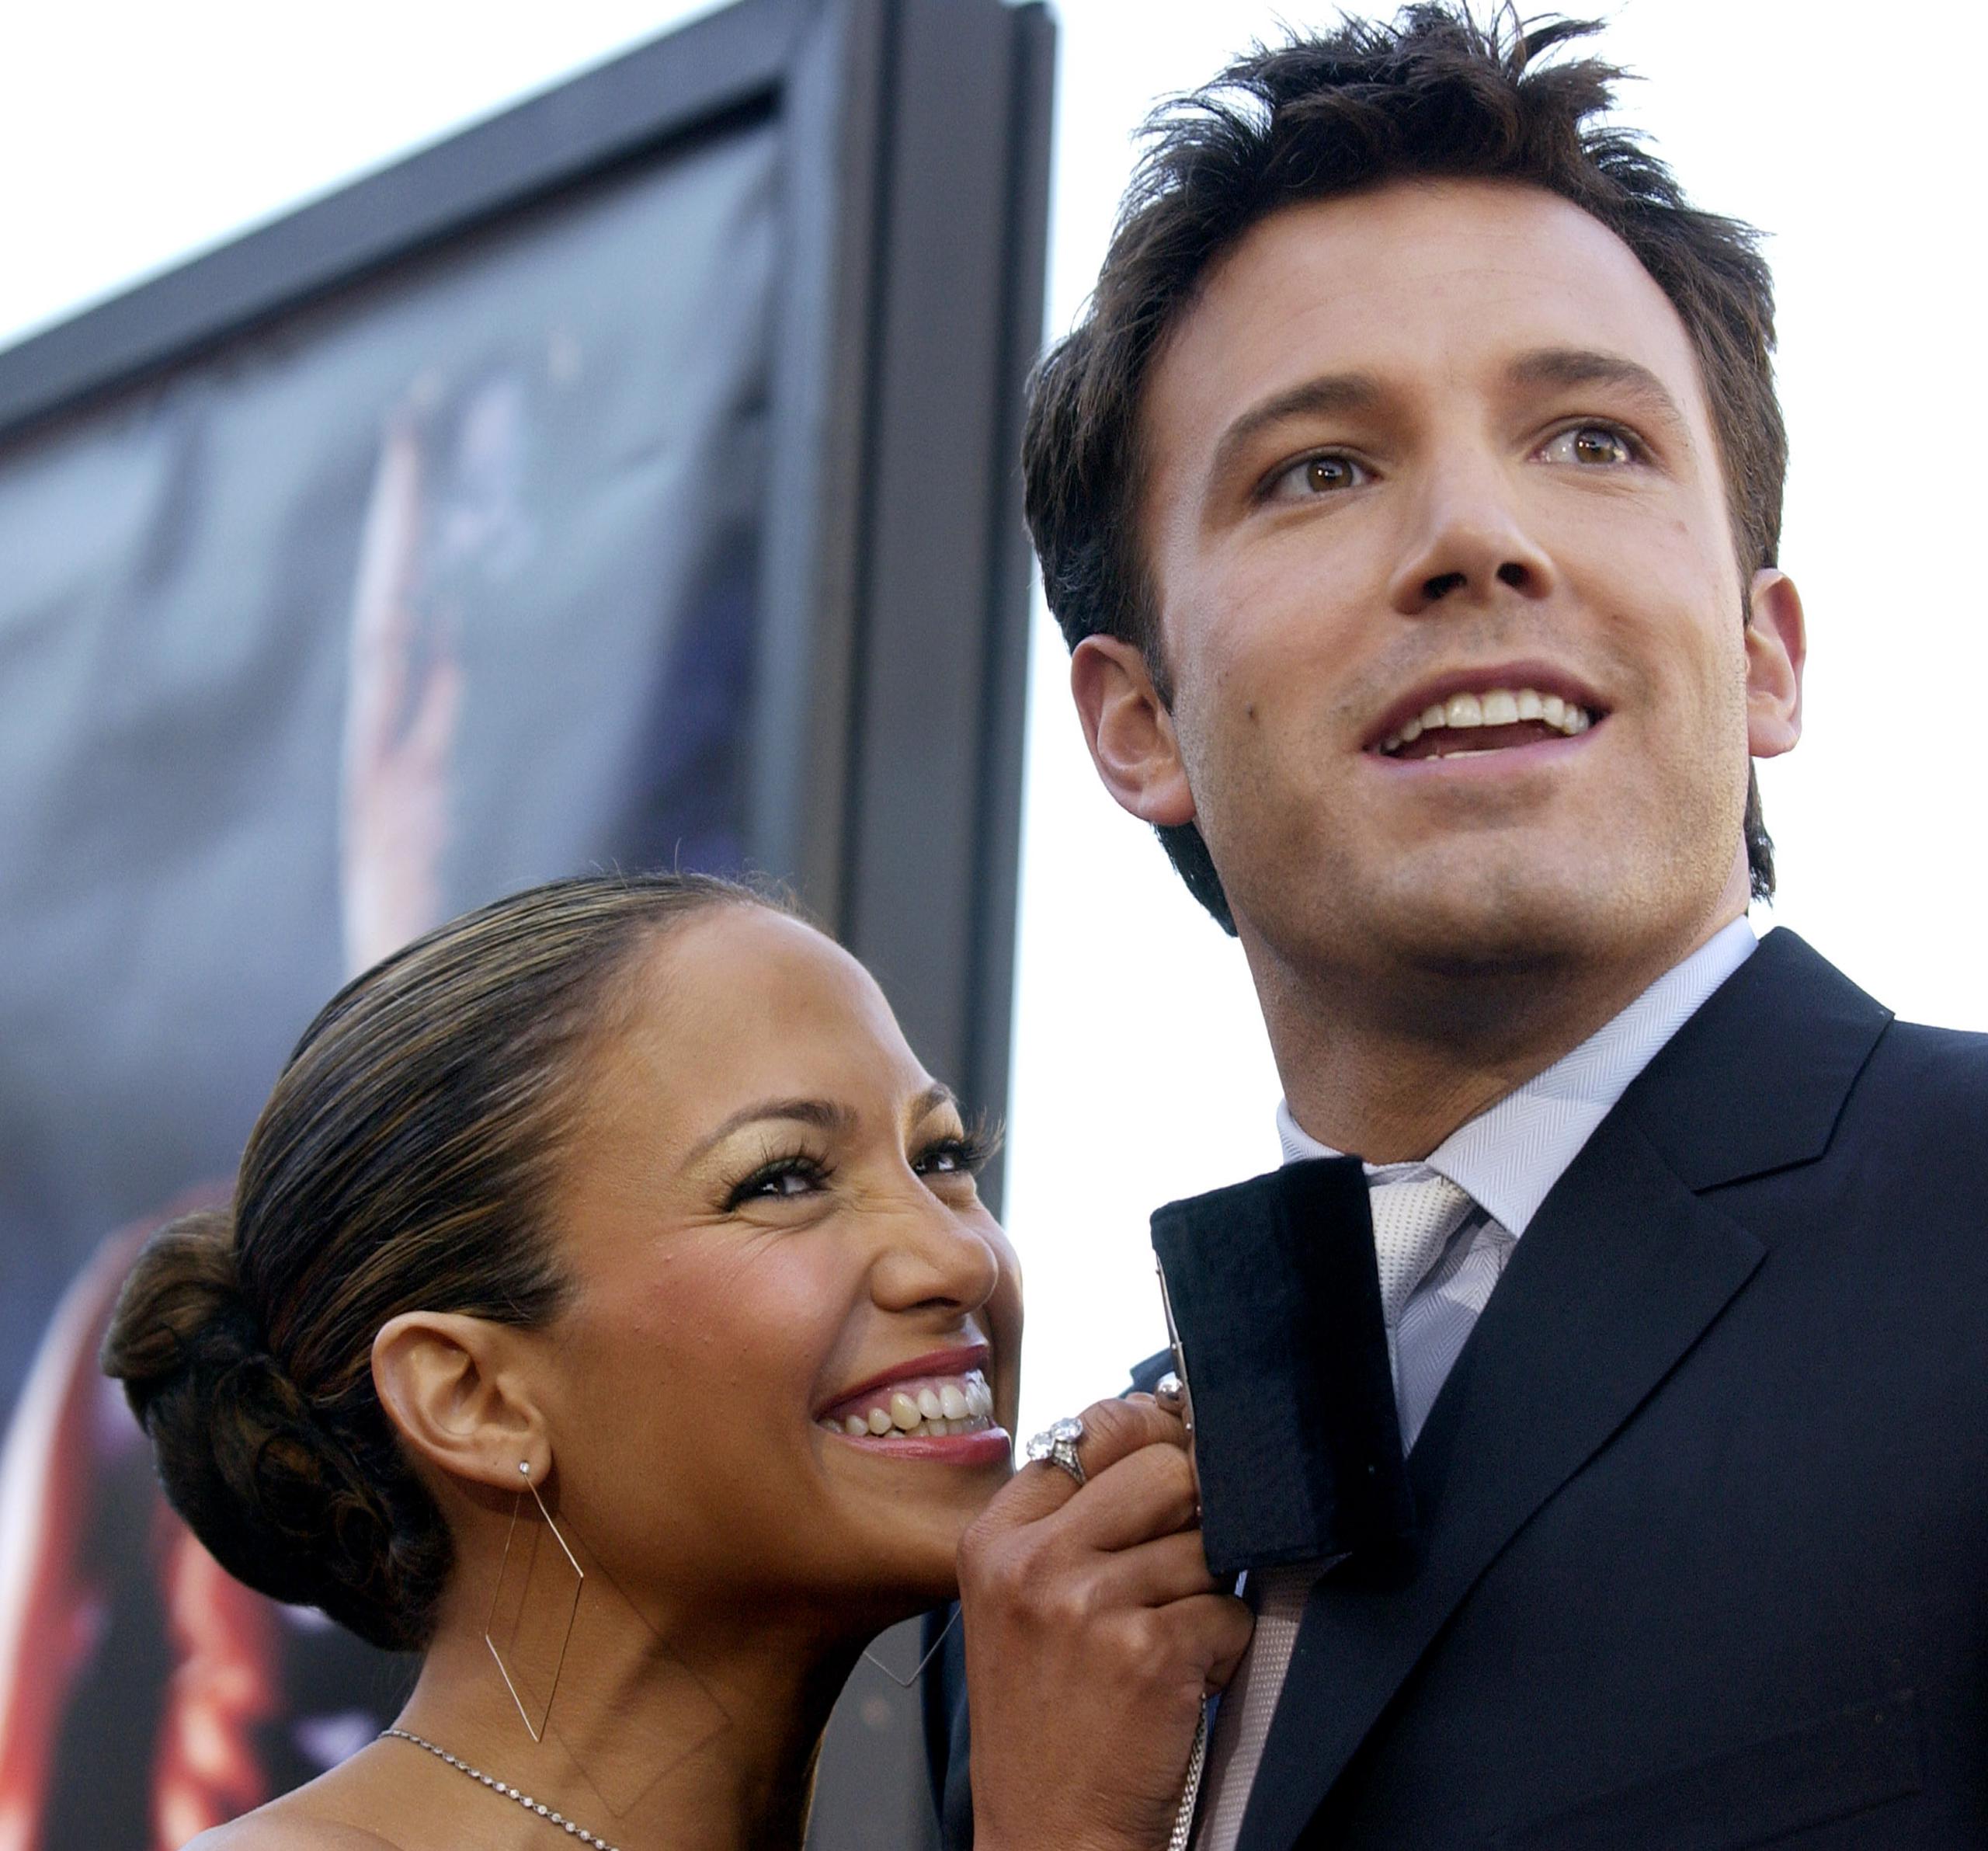 "Daredevil" star Ben Affleck, accompanied by his fiancee Jennifer Lopez, attends the premiere of the film in the Westwood section of Los Angeles, Sunday, Feb. 9, 2003. (AP Photo/Chris Pizzello)